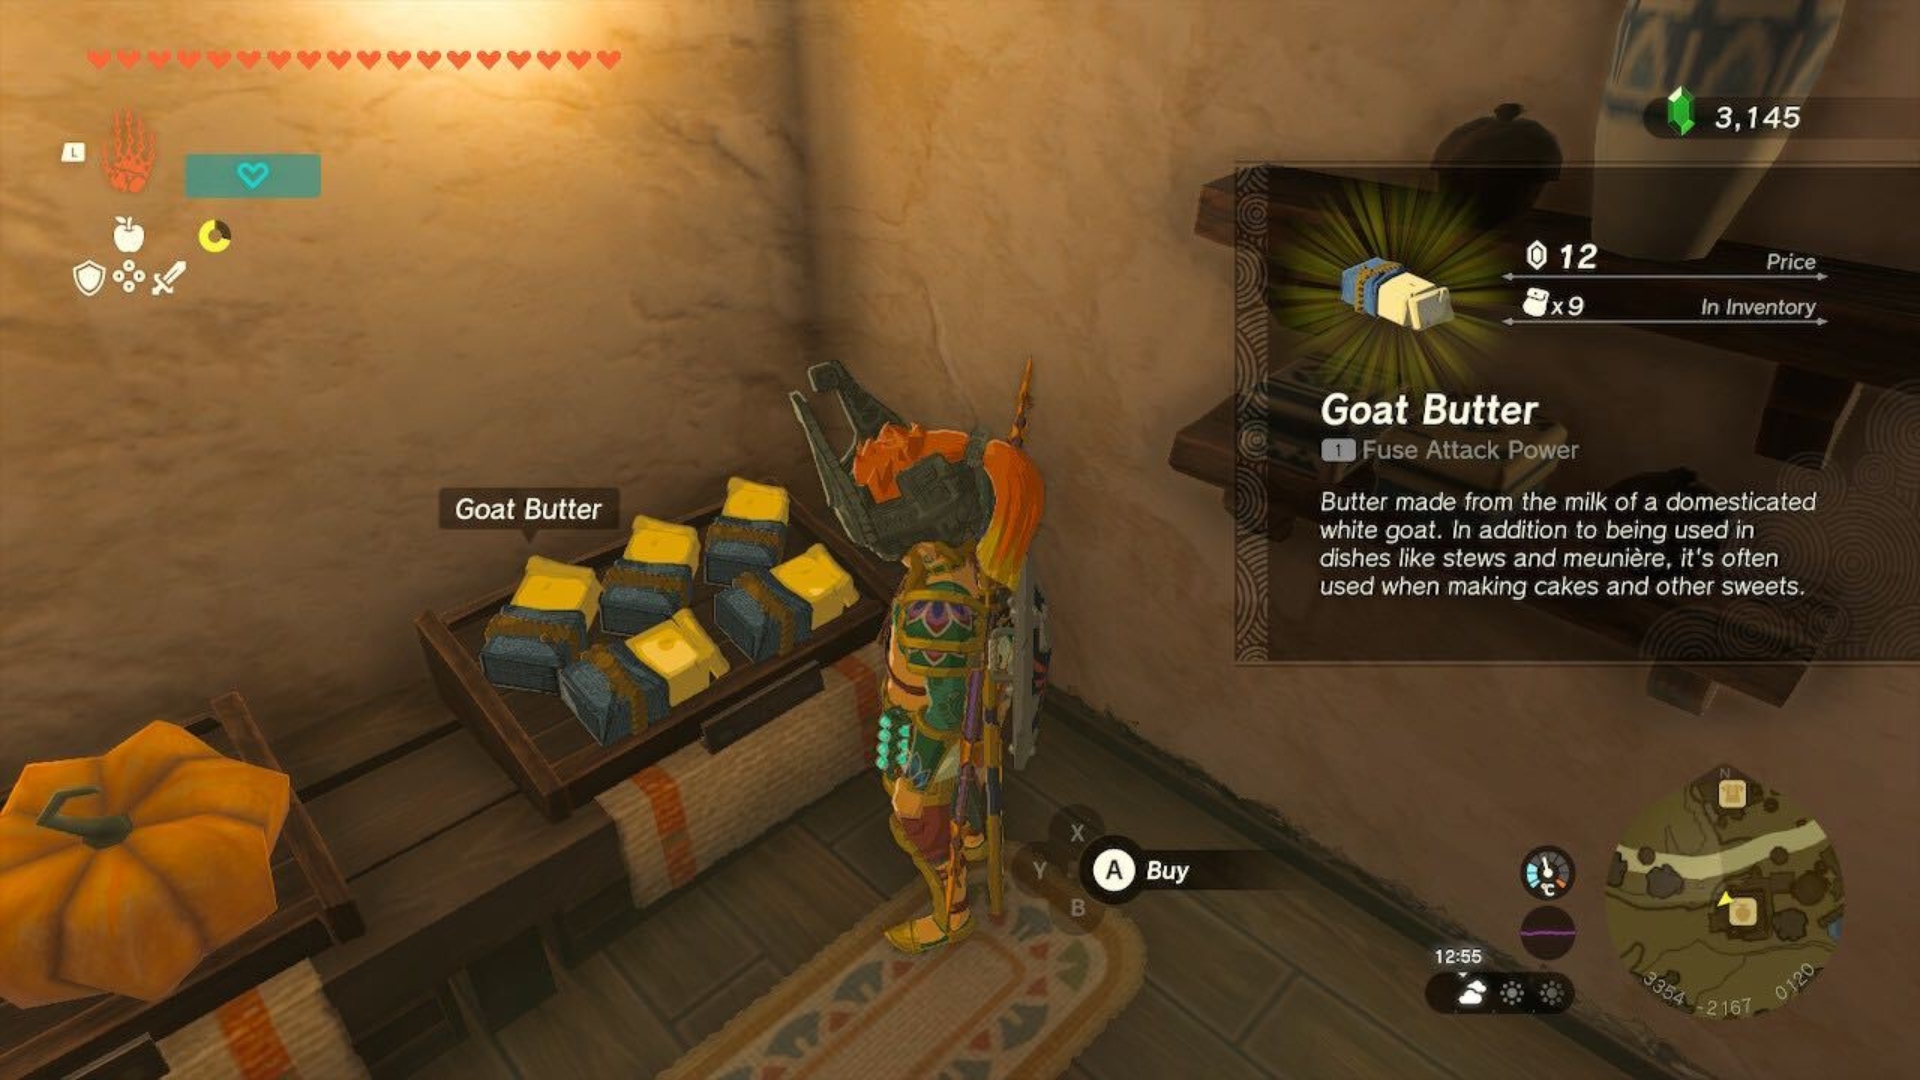 Link buying Goat Butter at the store in Tears of the Kingdom.